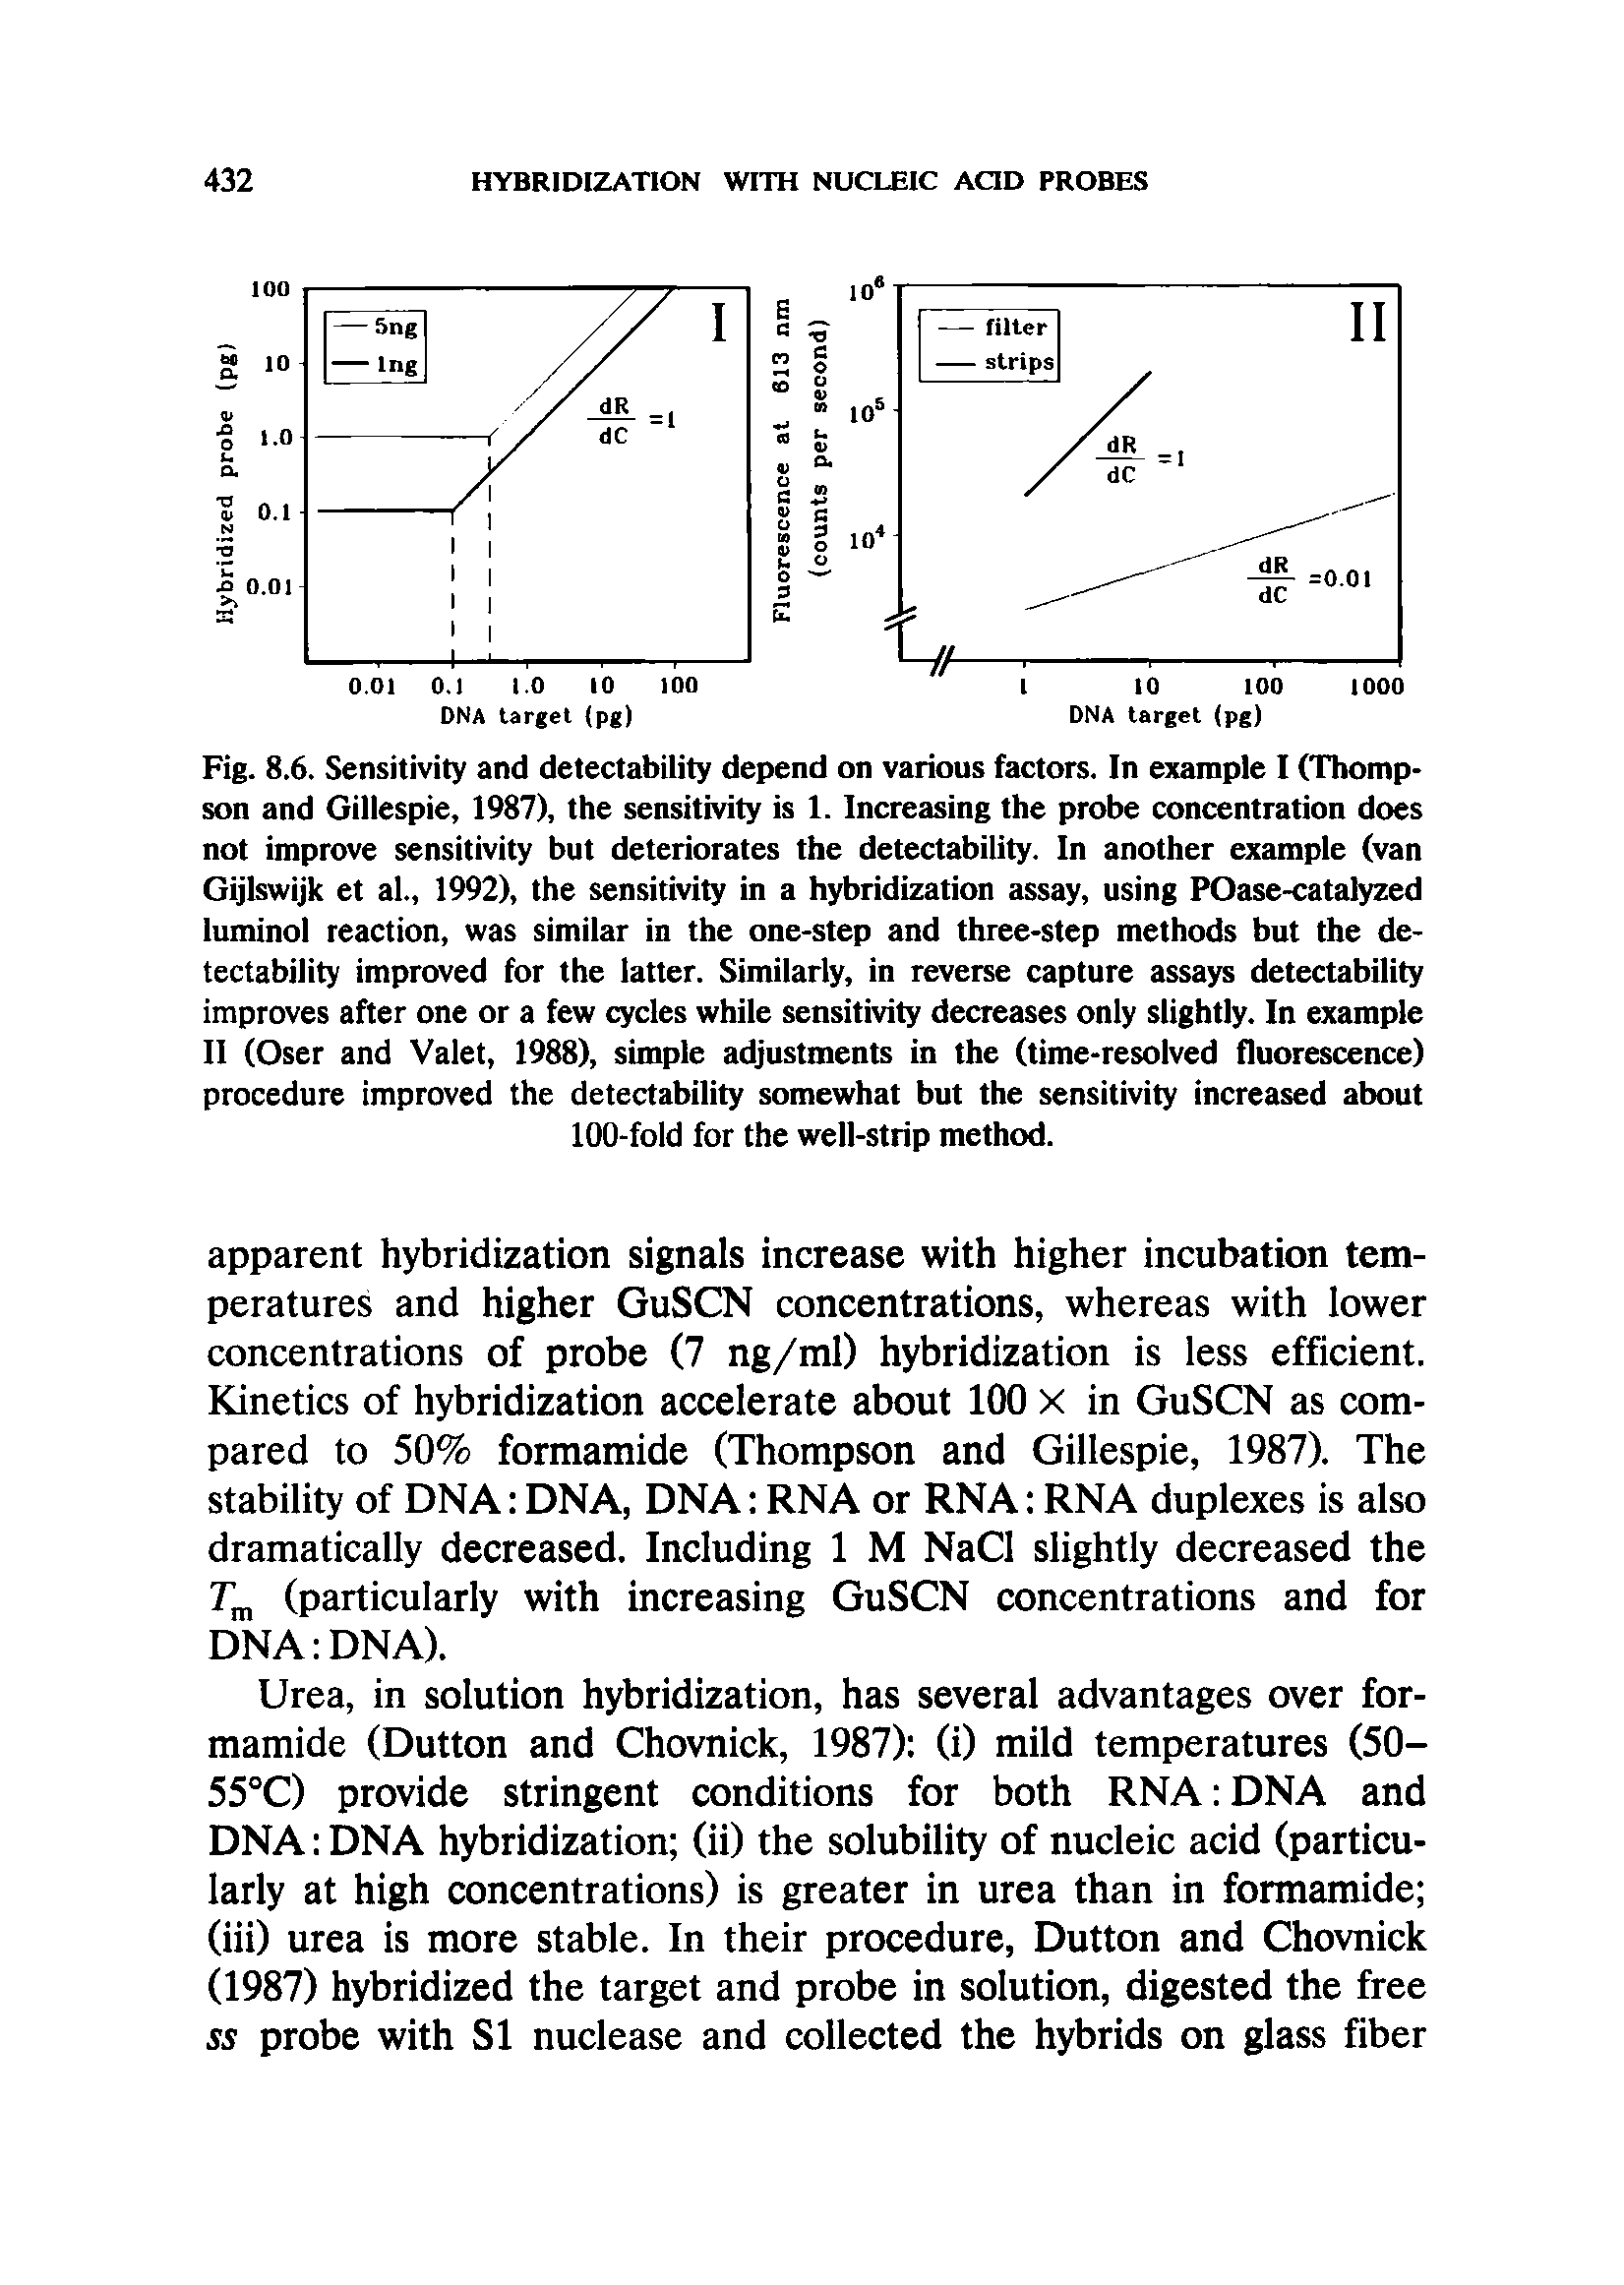 Fig. 8.6. Sensitivity and detectability depend on various factors. In example I (Thompson and Gillespie, 1987), the sensitivity is 1. Increasing the probe concentration does not improve sensitivity but deteriorates the detectability. In another example (van Gijlswijk et al., 1992), the sensitivity in a hybridization assay, using POase-catalyzed luminol reaction, was similar in the one-step and three-step methods but the detectability improved for the latter. Similarly, in reverse capture assays detectability improves after one or a few cycles while sensitivity decreases only slightly. In example II (Oser and Valet, 1988), simple adjustments in the (time-resolved fluorescence) procedure improved the detectability somewhat but the sensitivity increased about 100-fold for the well-strip method.